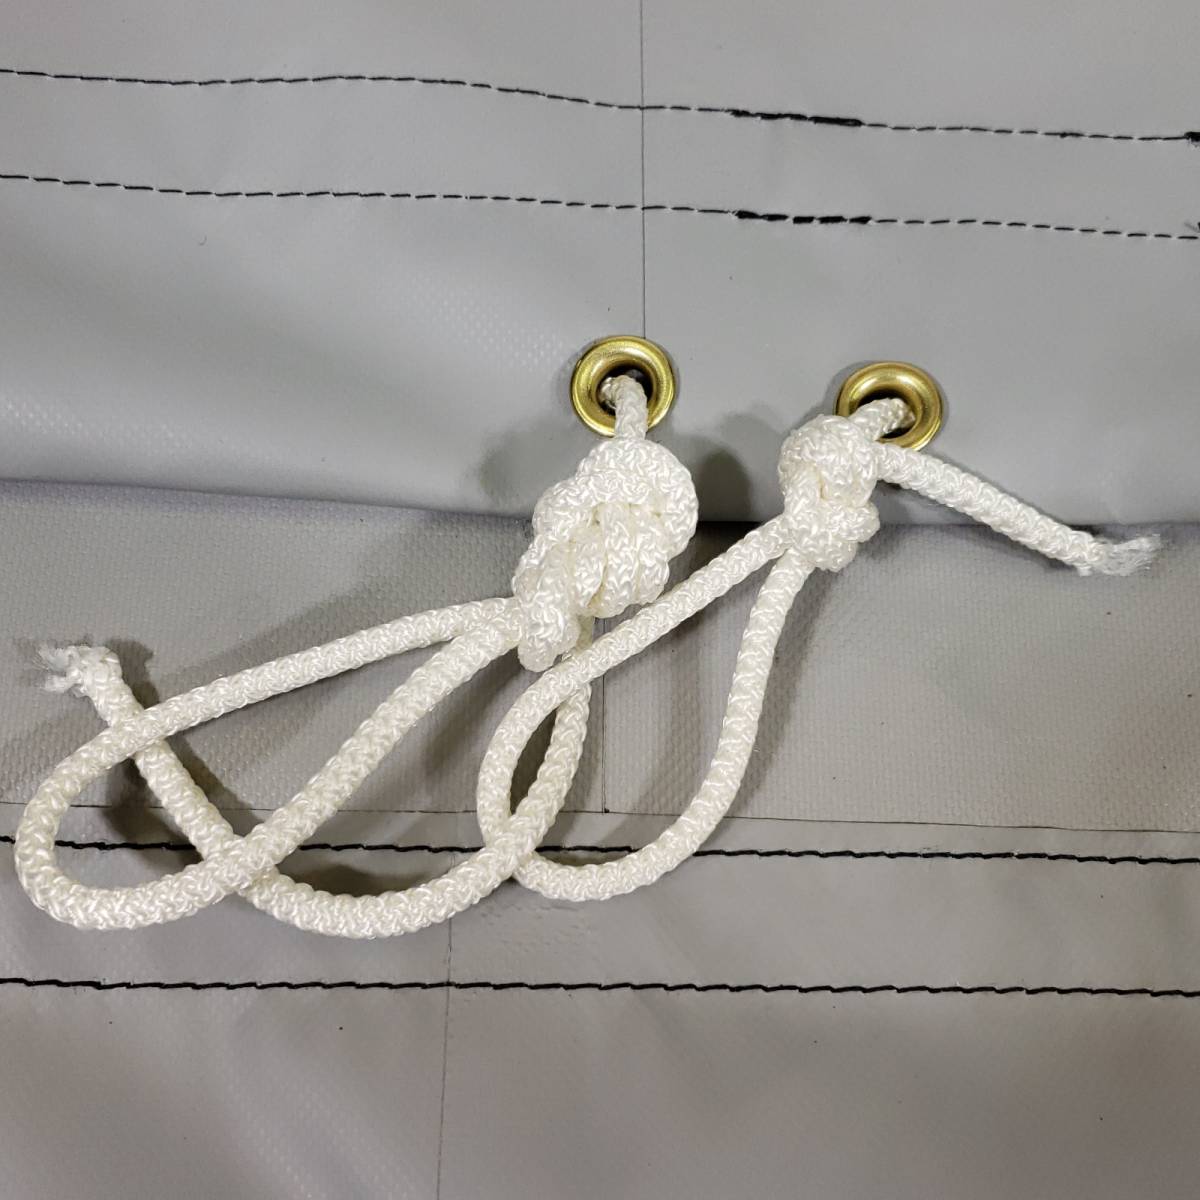 1/4 Solid Braid Rope Drawstring inserted into the Hem of Boxed Shaped Tarps  - Lookout Mountain Tarp